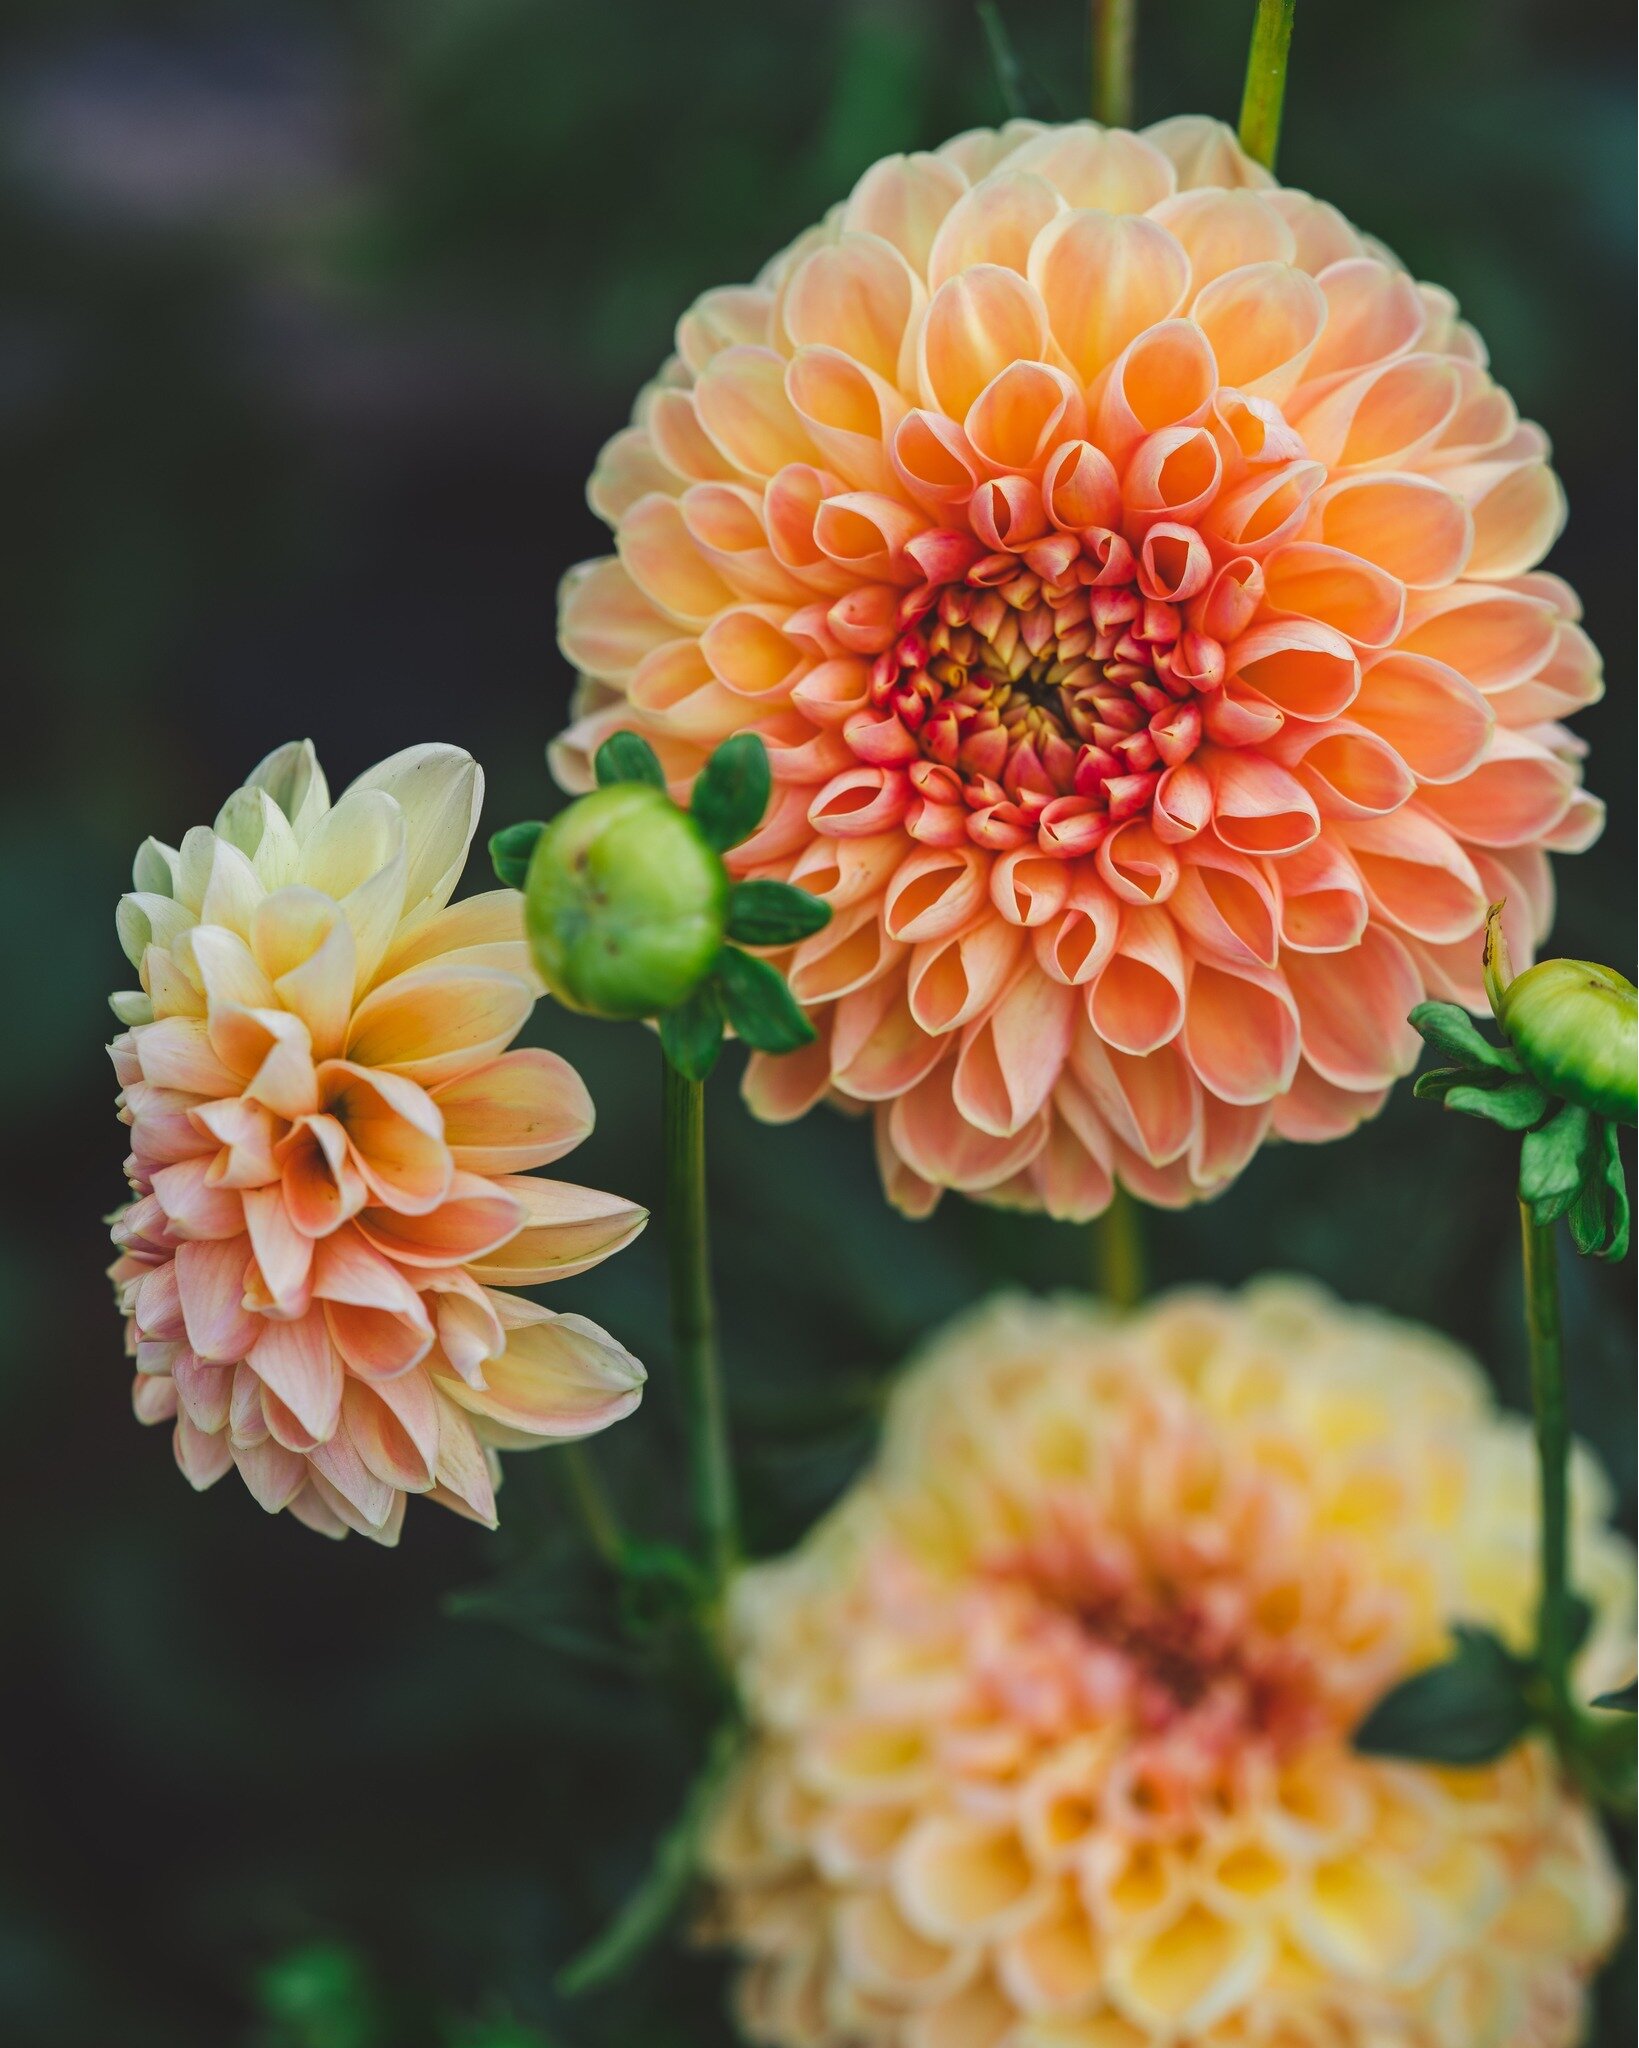 ✨DAHLIA TUBER SALE IS OPEN ! ✨

It is an exciting day! Our Dahlia Tuber Sale is officially open! 

We're bursting with excitement as we wrap up an amazing Dahlia season, yielding a plethora of happy tubers that we can't wait to share with you (seriou